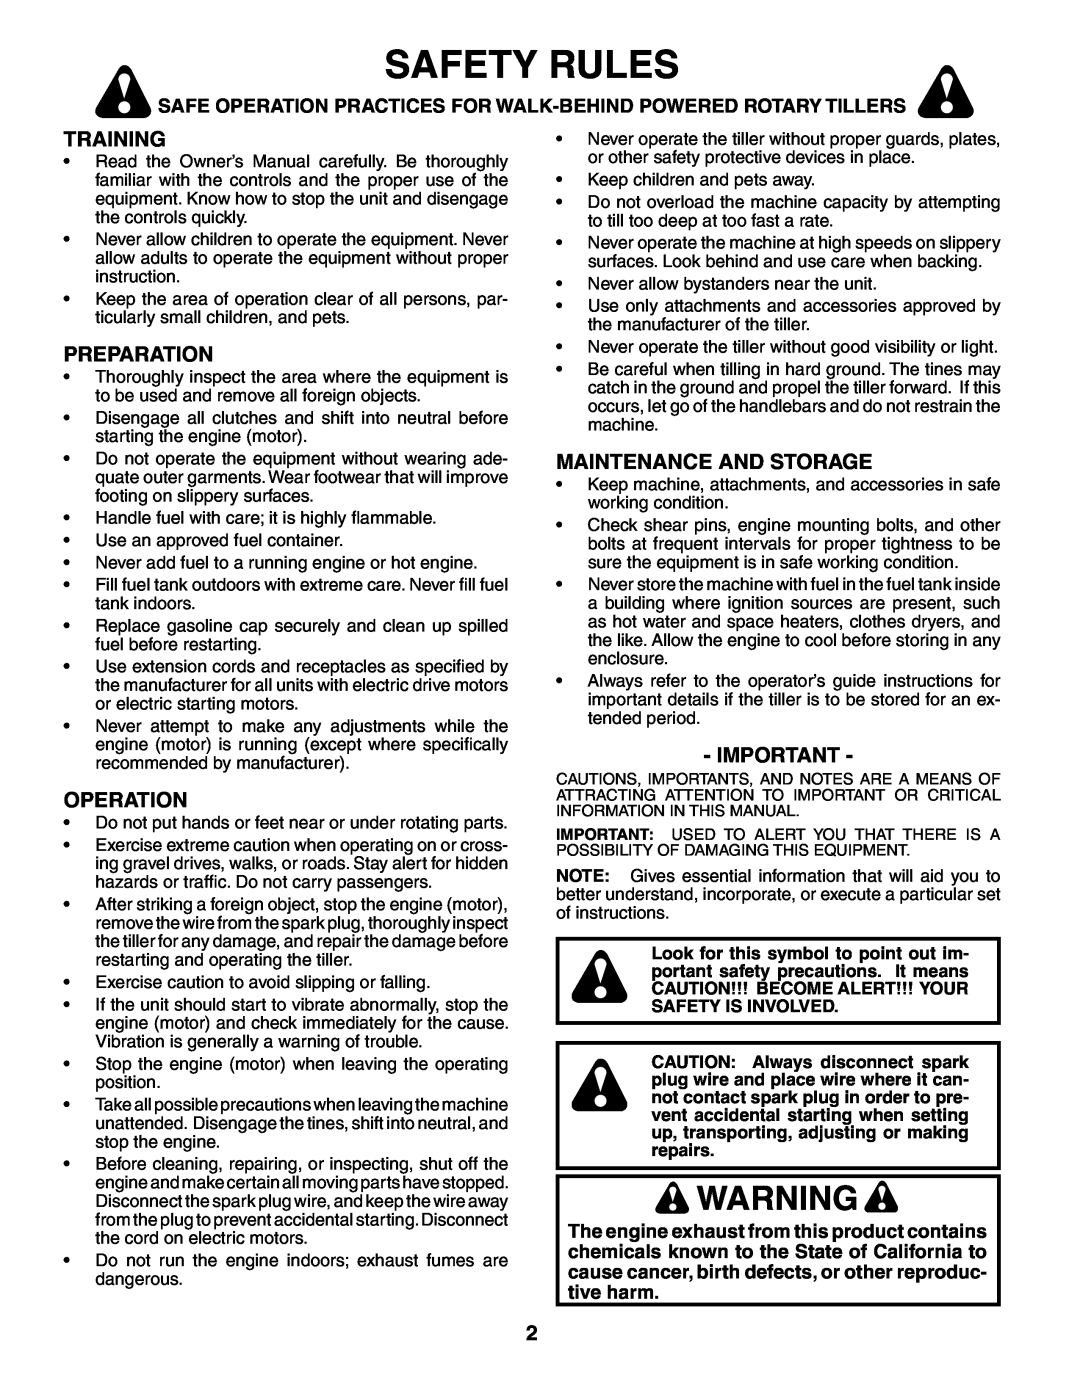 Poulan 190388 owner manual Safety Rules, Training, Preparation, Operation, Maintenance And Storage 